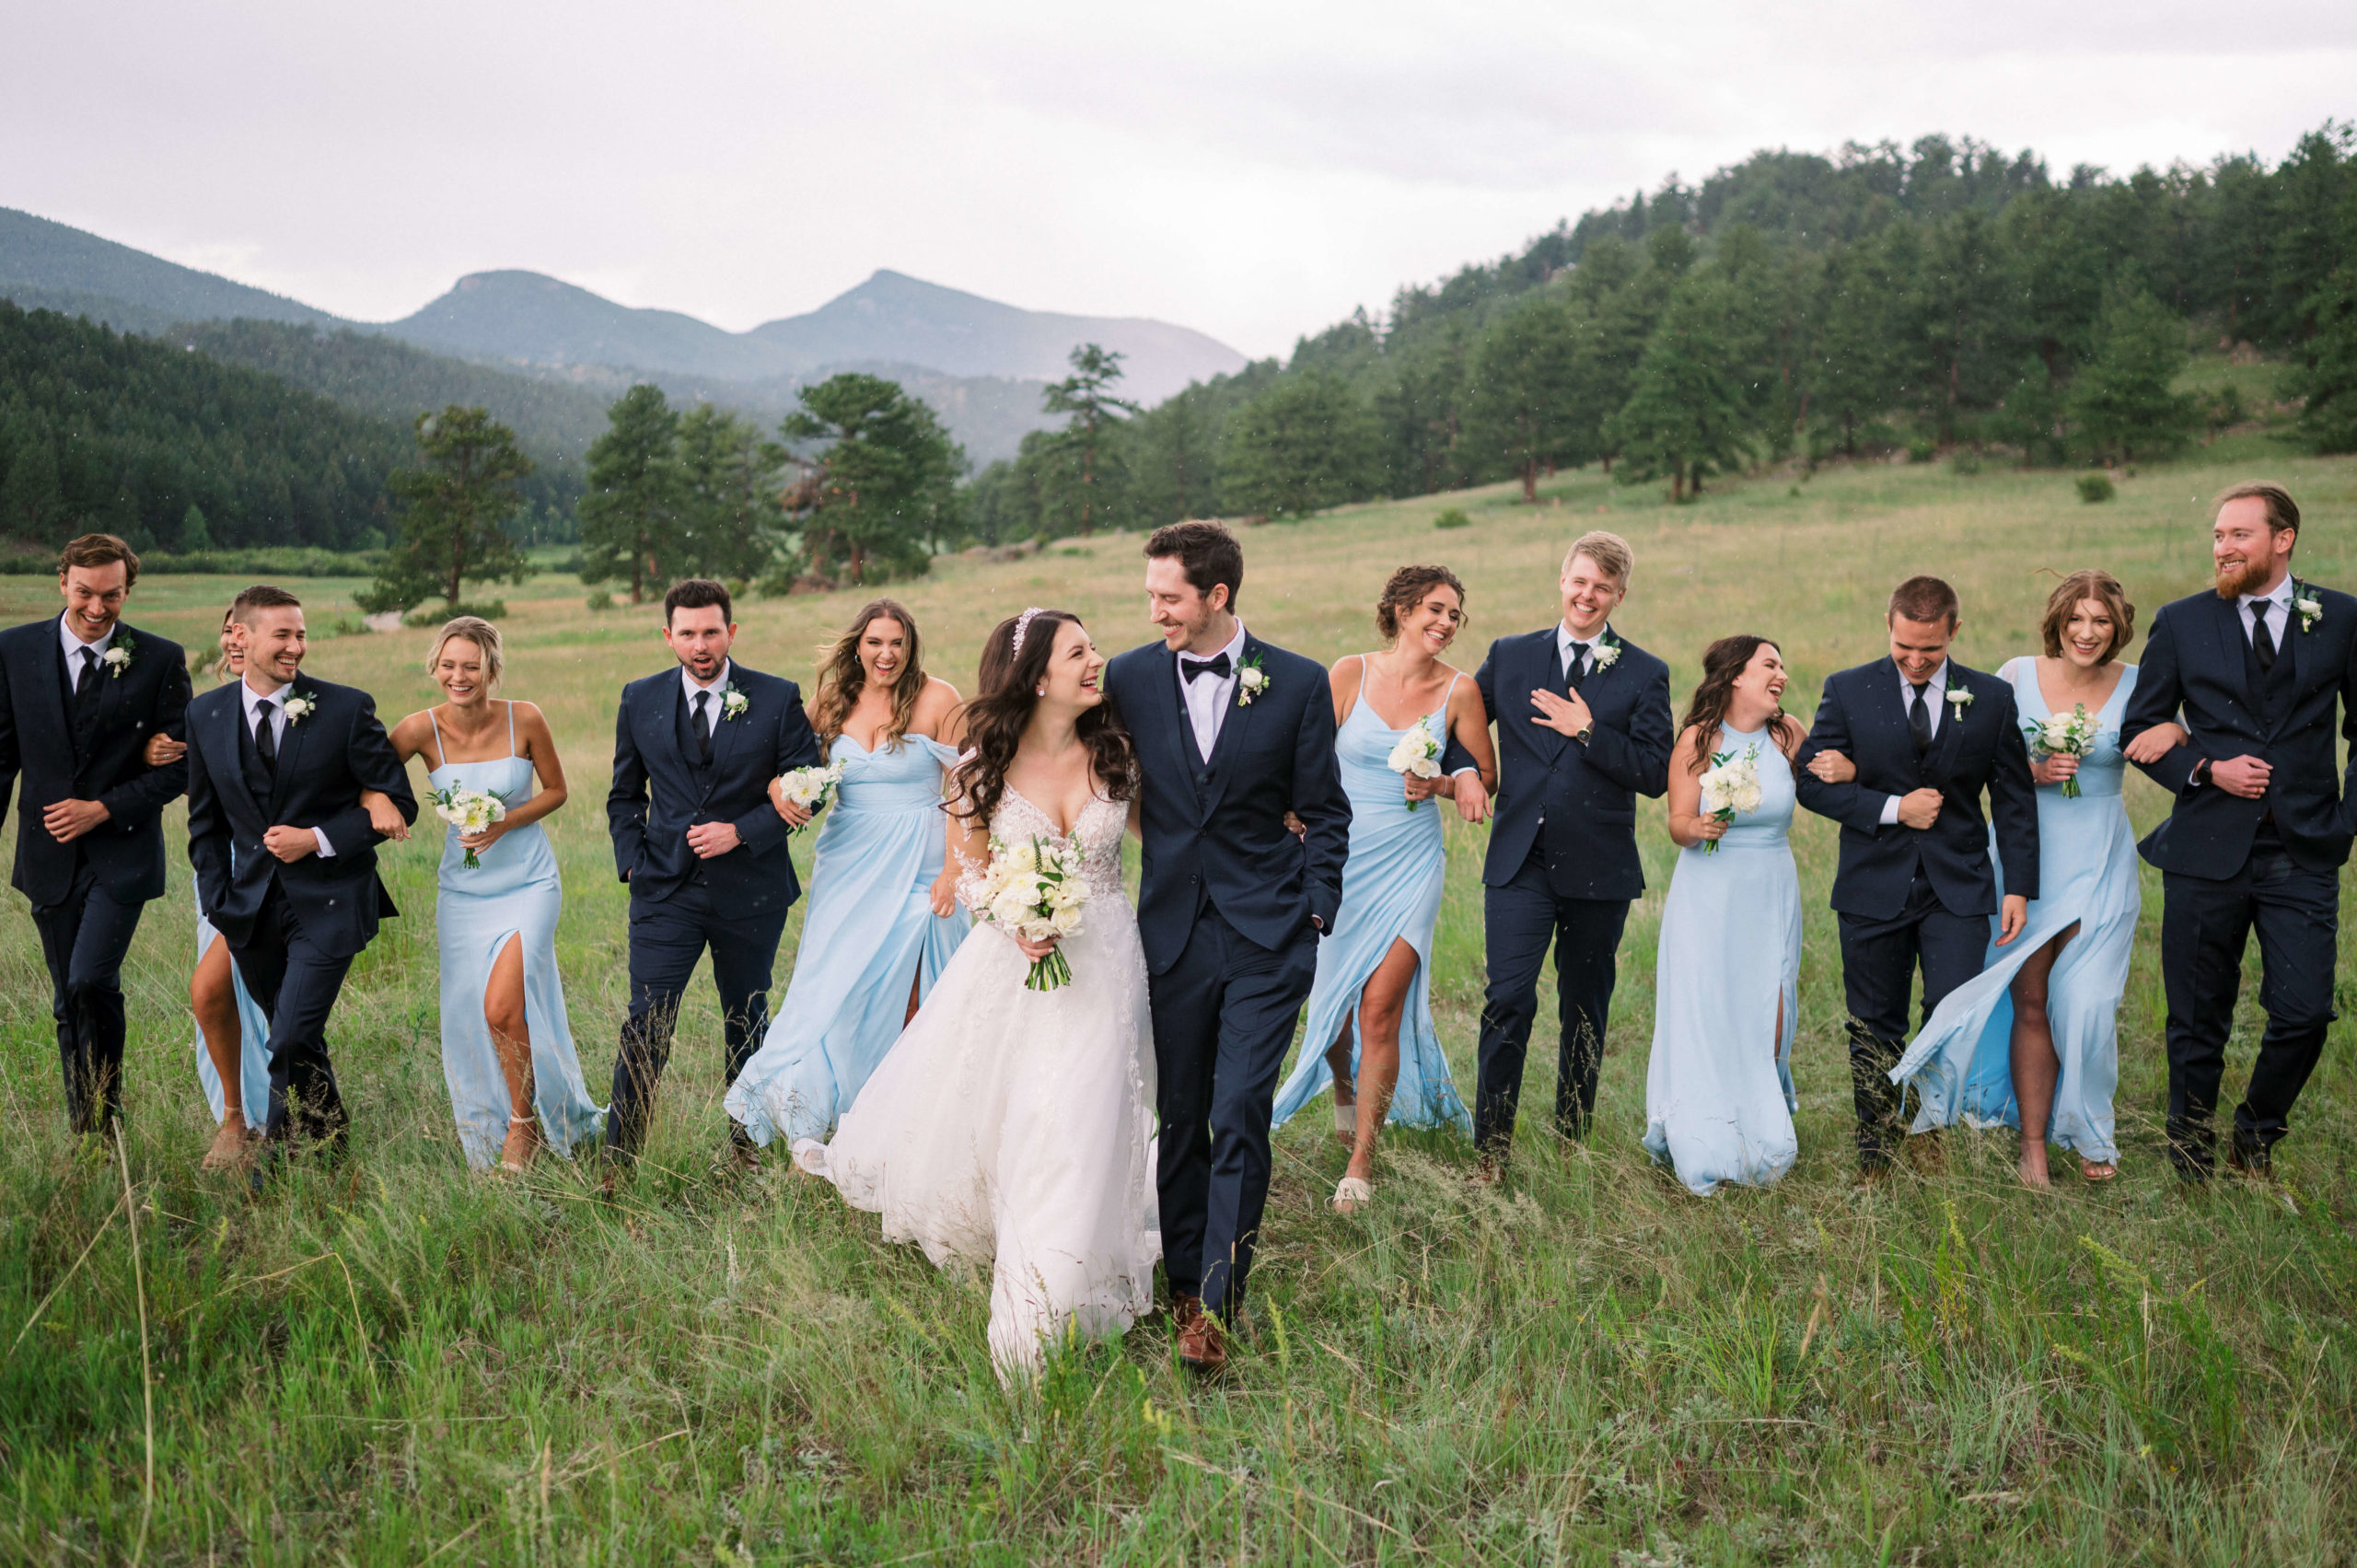 Bride, Groom, and Bridal party walking in a field with mountains in the background at wedding planned by Privé events